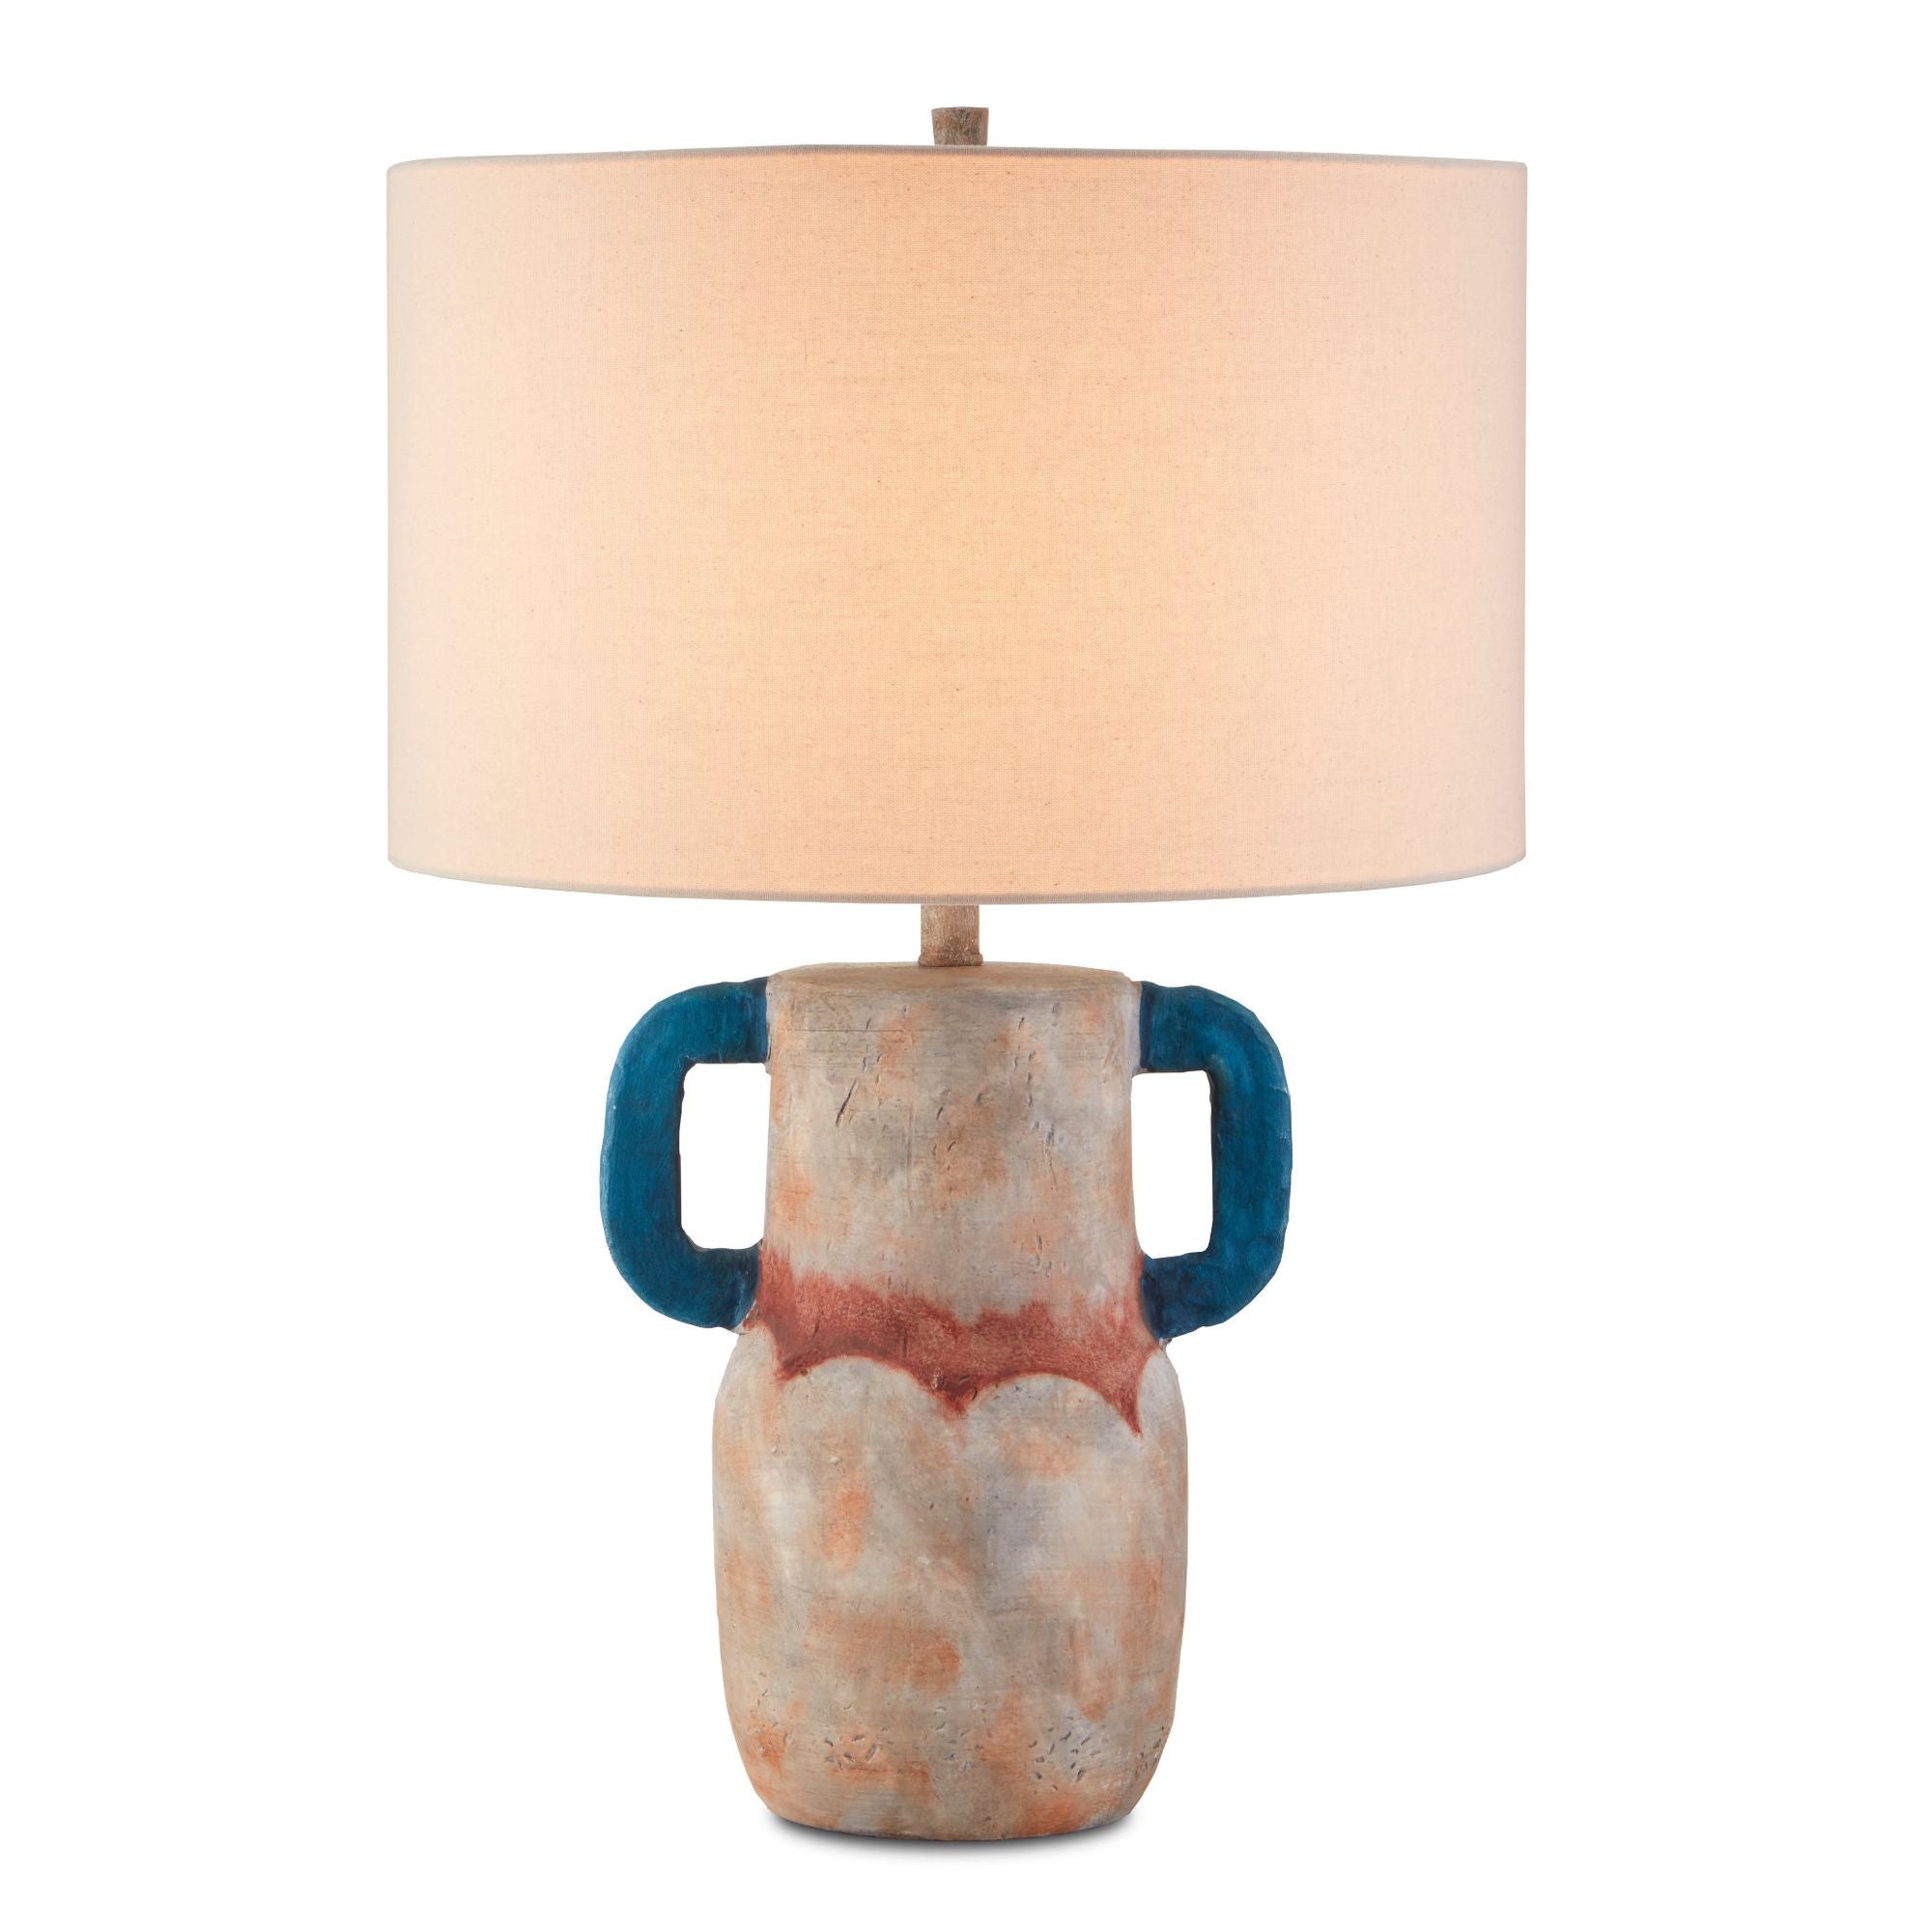 Arcadia Table Lamp - Sand/Teal/Red